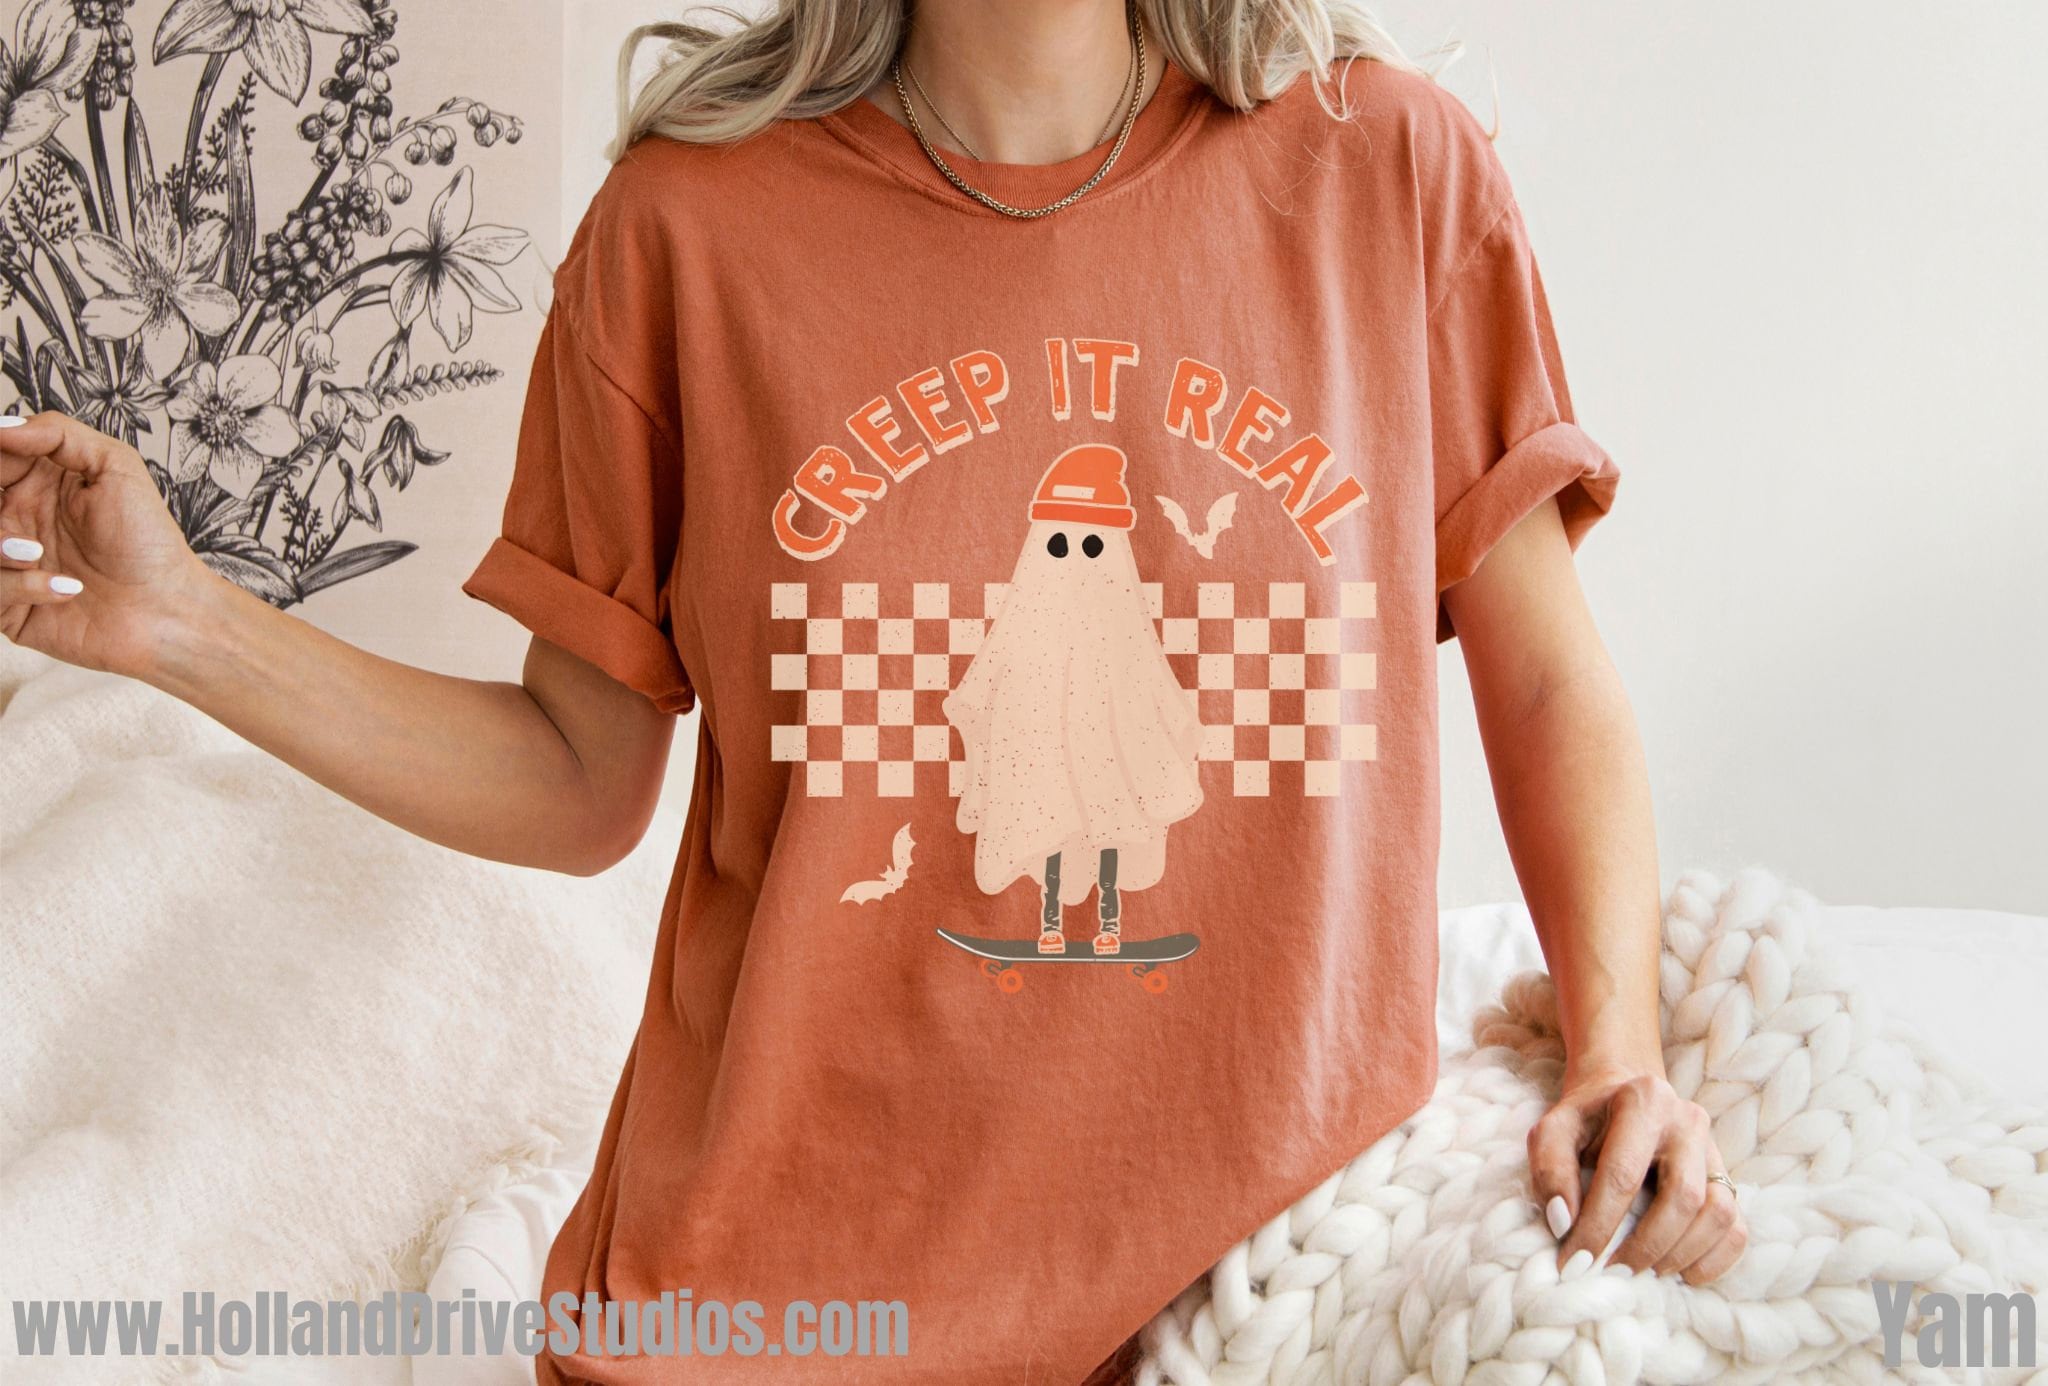 Discover Retro Halloween  Fall Shirt Creep it Real TShirt Vintage Ghost Halloween T-Shirt Witch Oversized Crewneck Fall Shirt For Women